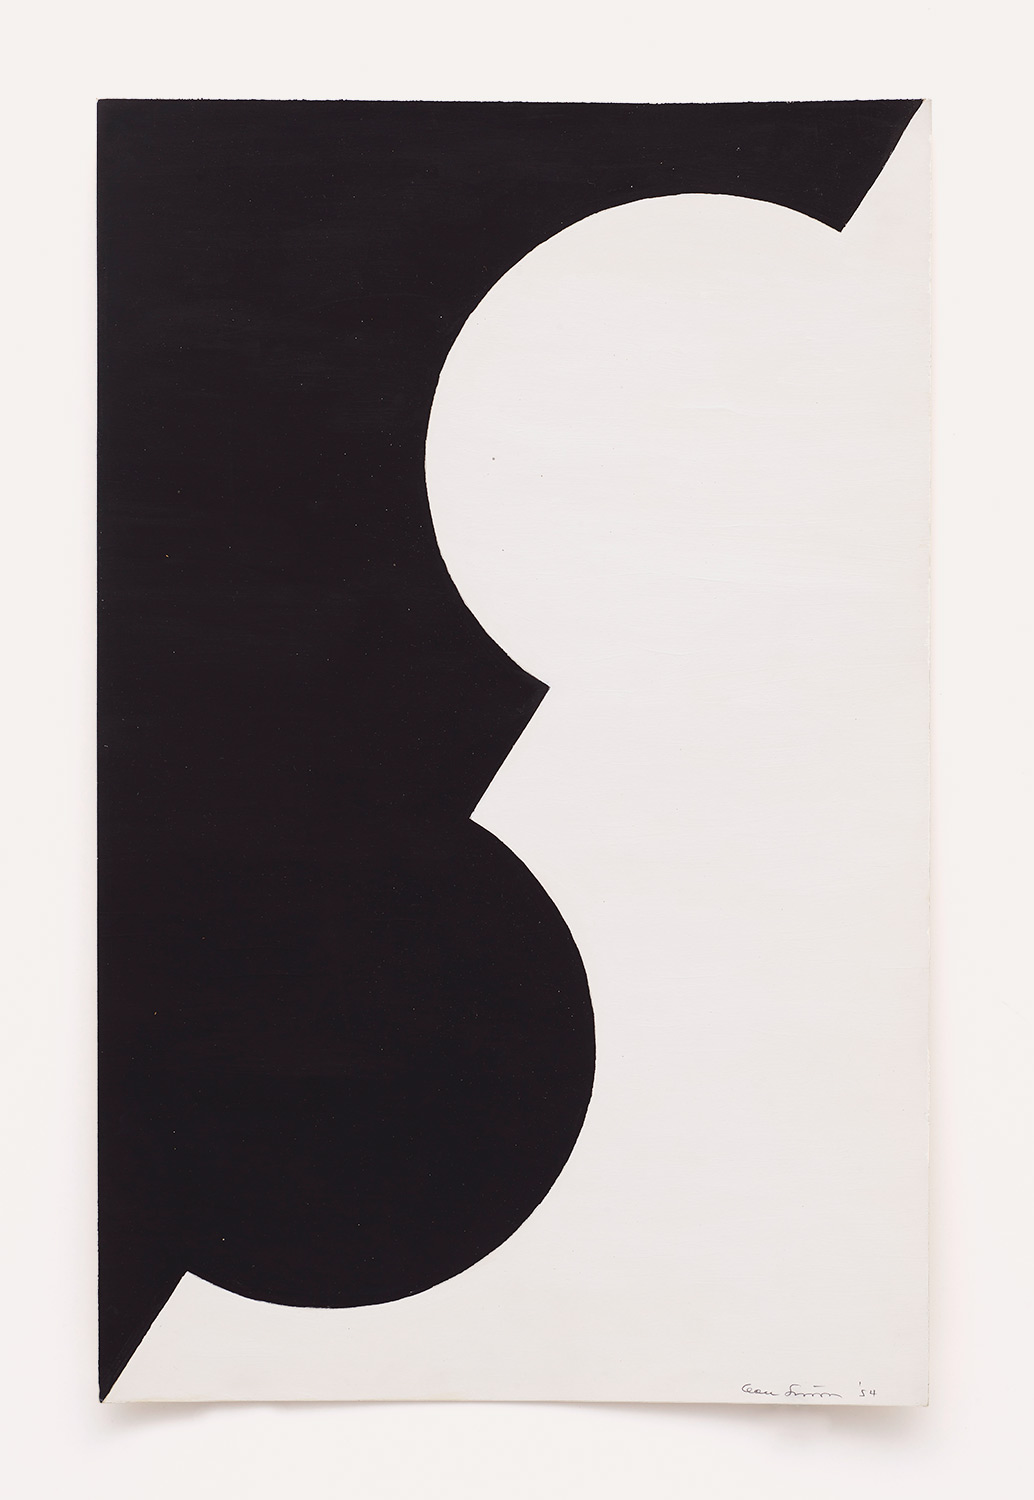 Geometric black and white composition using black paint on white paper by Leon Polk Smith. the shapes created by the negative space make you wonder which dominant. A triangular shape is cut through the paper and two circles protrude into the triangular shapes from either side creating a powerful feeling of tension.